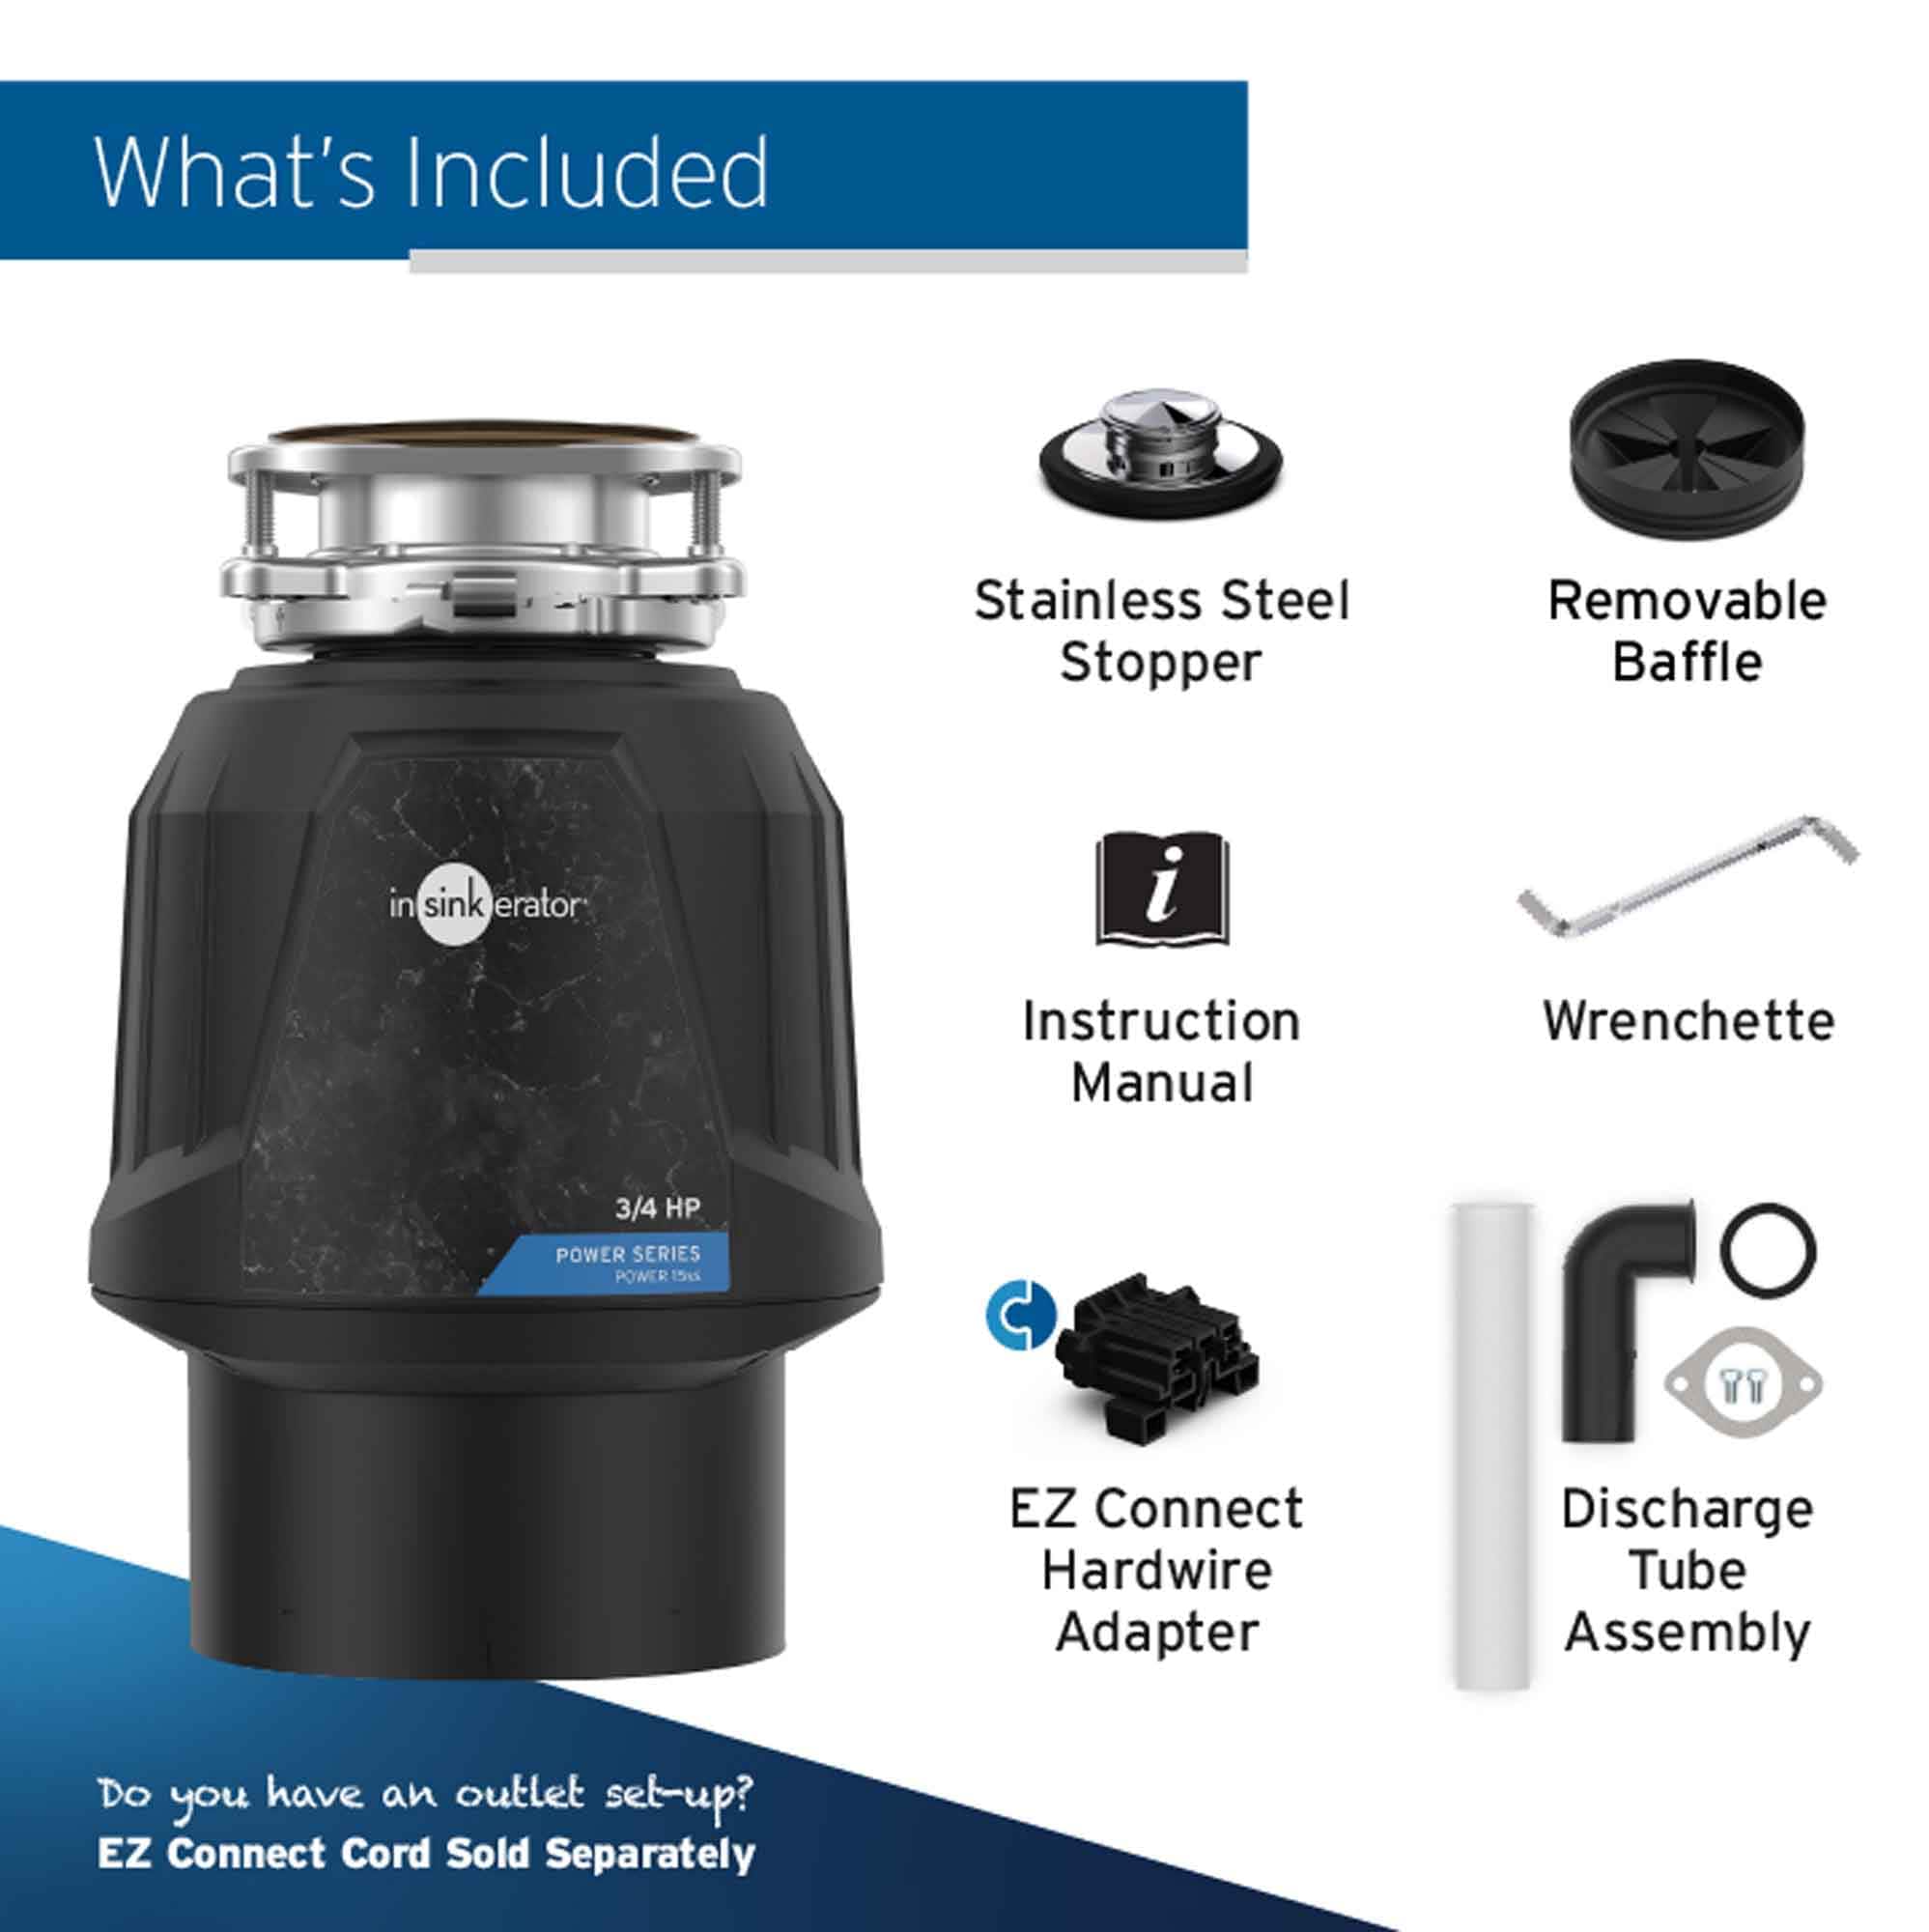 InSinkErator Non-corded 3/4-HP Continuous Feed Garbage Disposal in